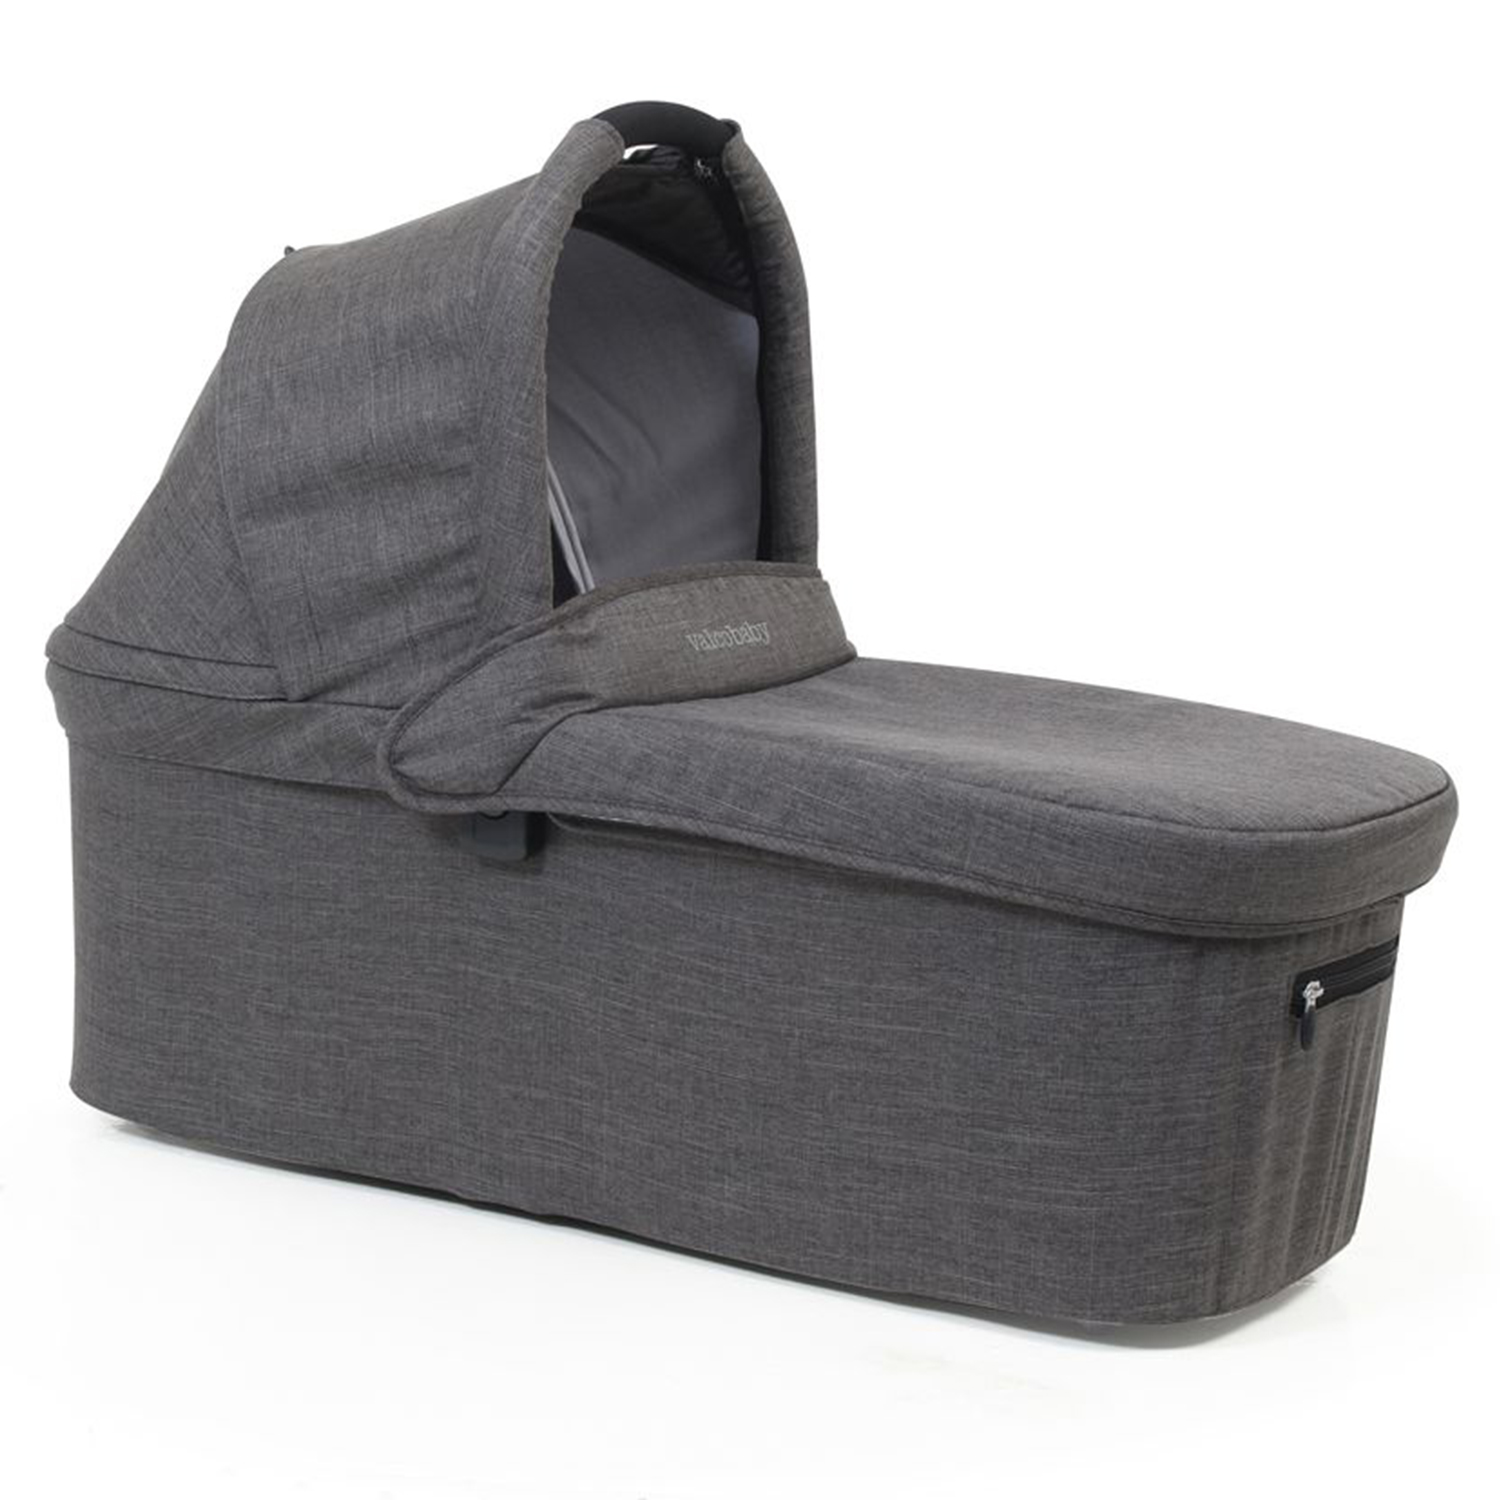 Люлька External Bassinet для Snap Duo Trend / Charcoal Valco Baby люлька valco baby external bassinet grey marle для snap duo trend